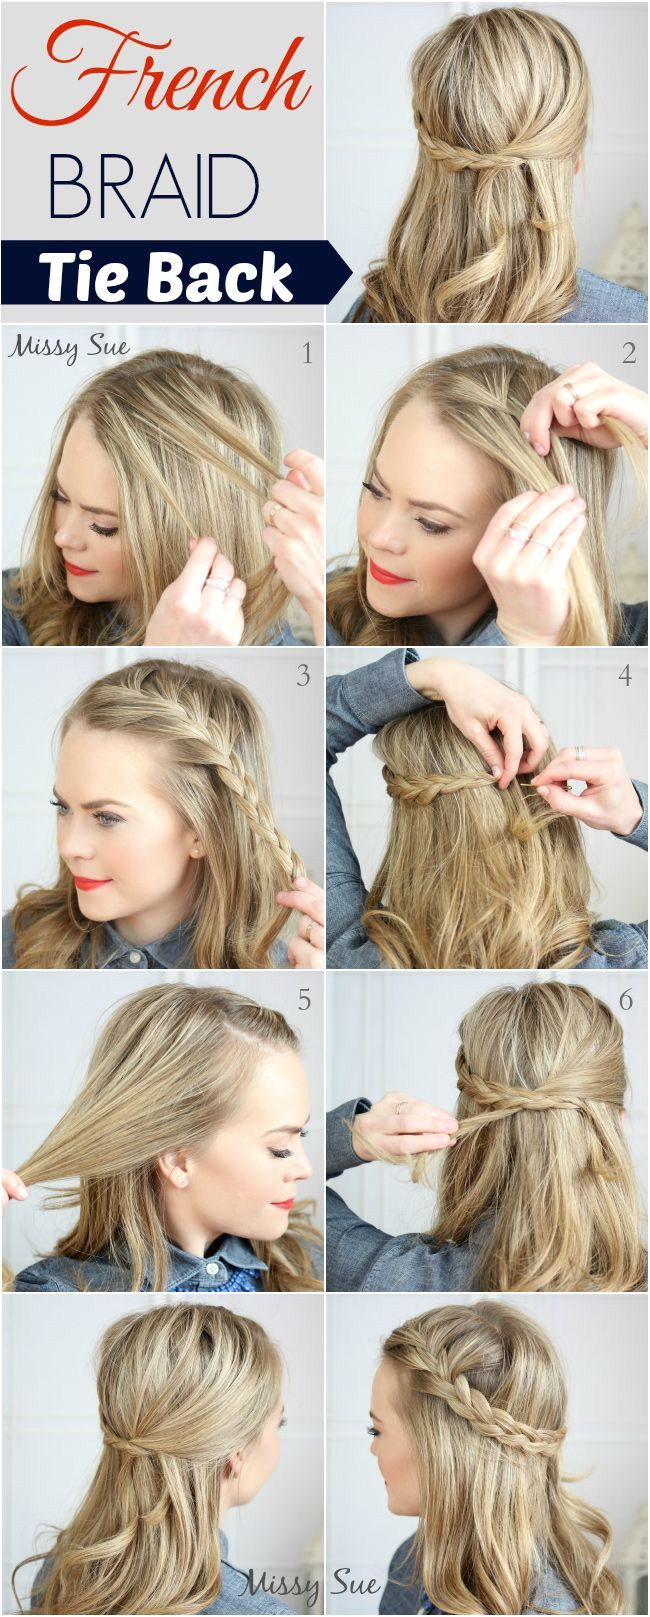 Diy Hairstyles with Open Hair 30 Step by Step Trendy Braided and Open Hairstyles for Young Girls